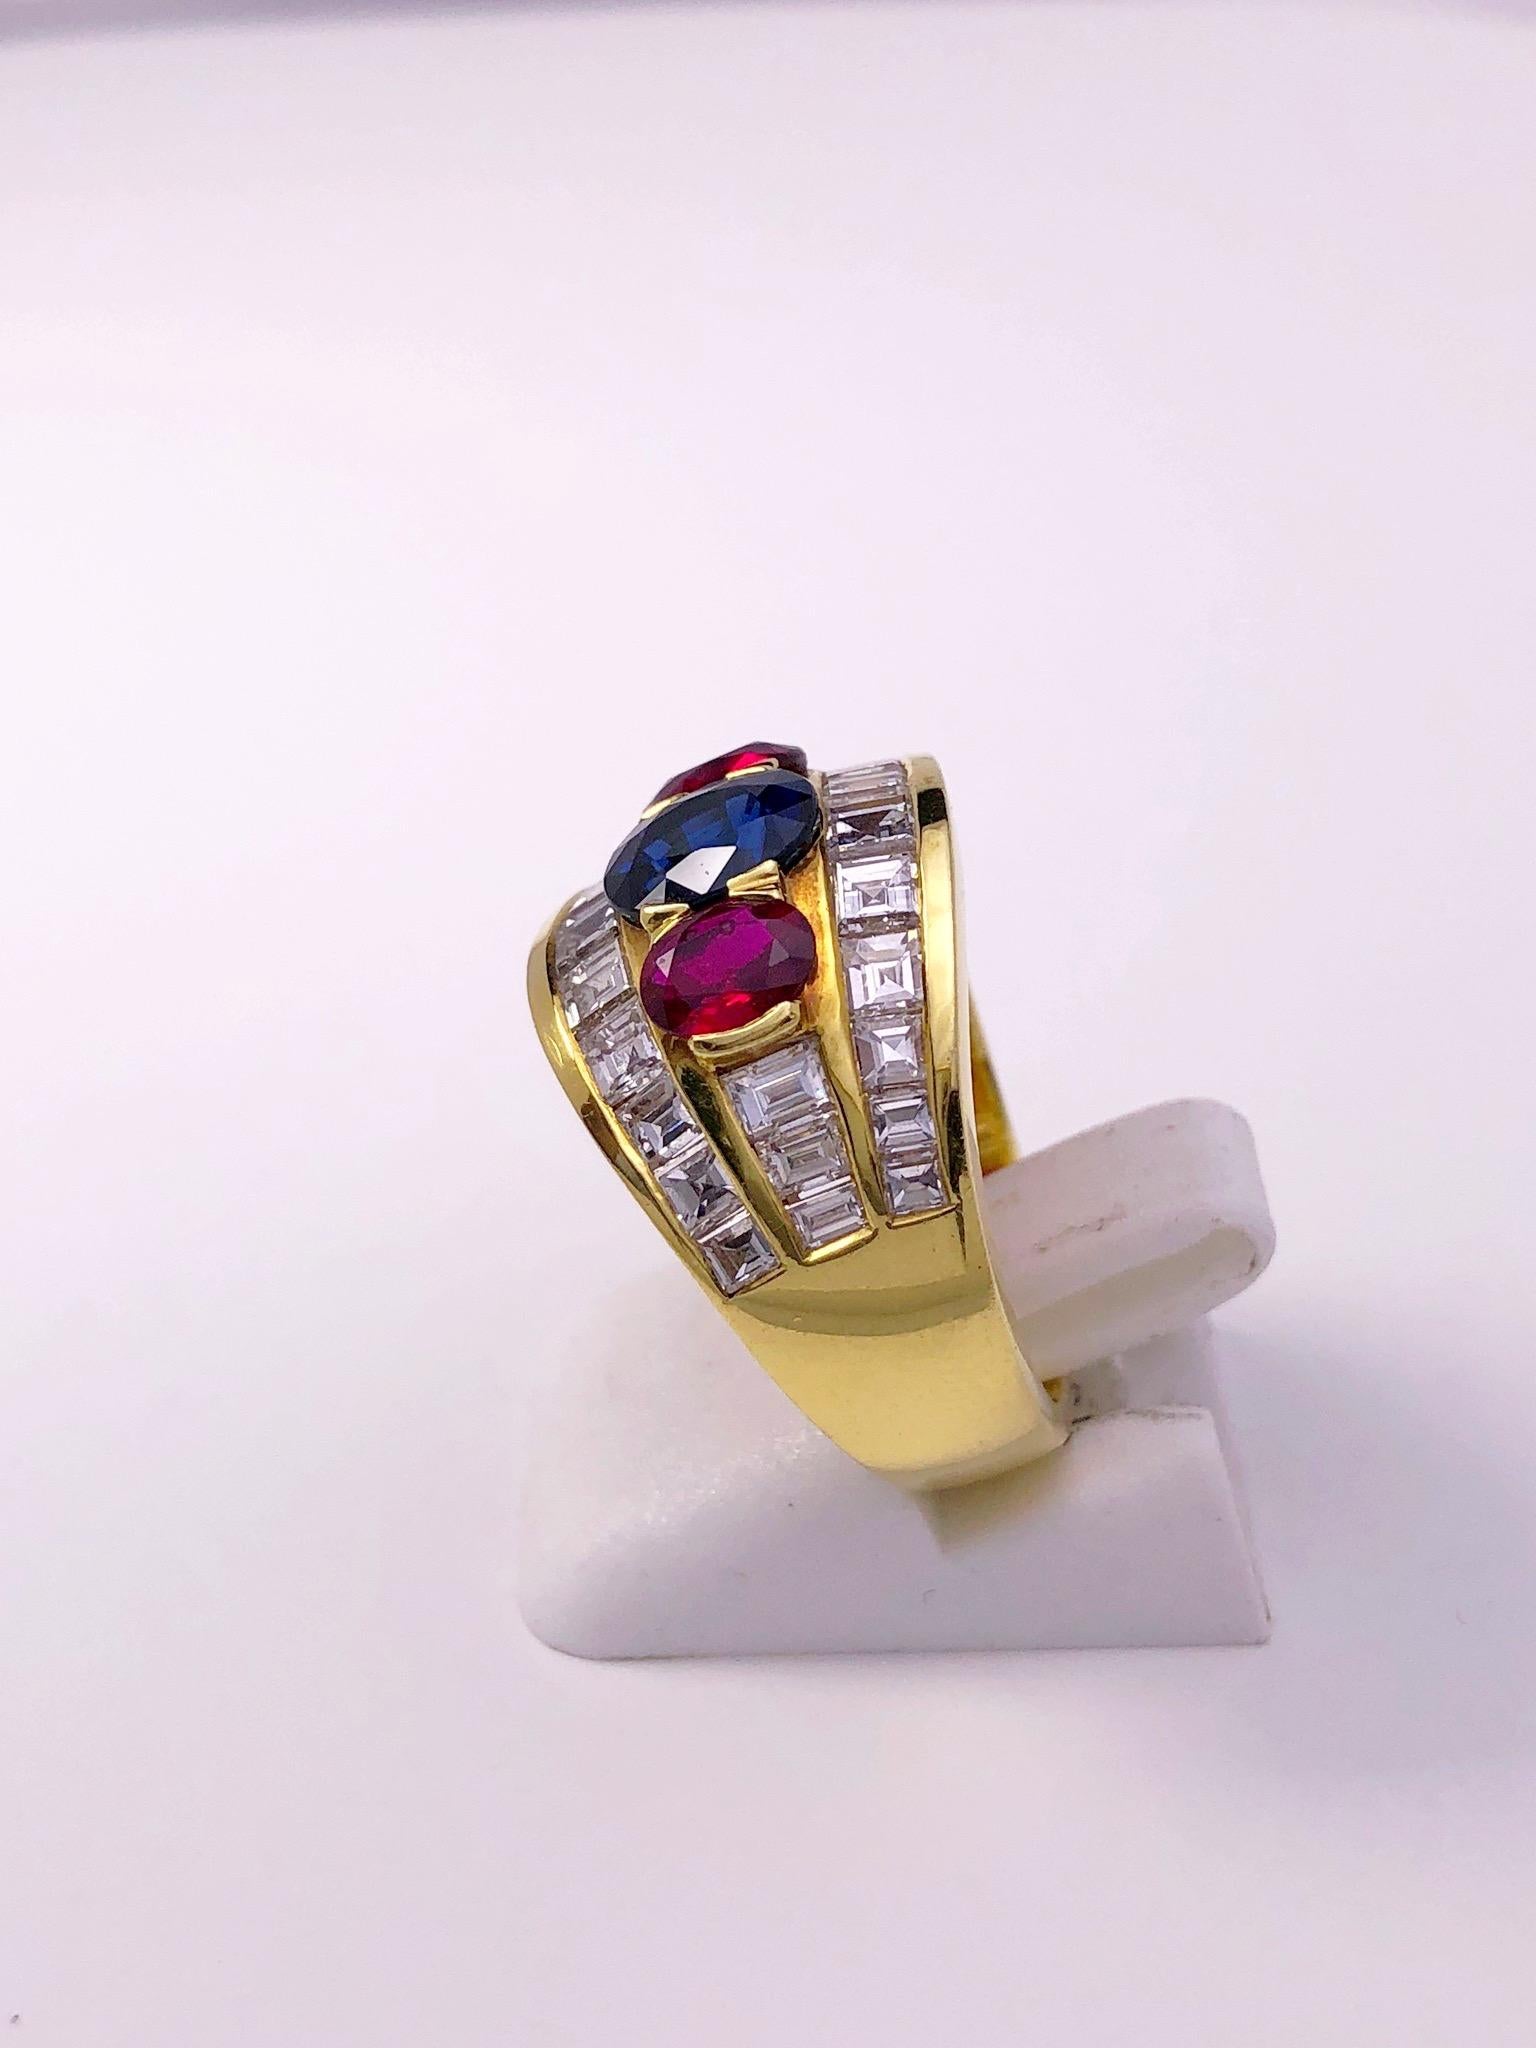 This 18KT. yellow gold ring centers an oval Blue Sapphire flanked on either side by oval Rubies. The 3 stones are set amid 3 rows of Calibre (square) cut diamonds.
Sapphire 1.53 carats
Rubies 0.92 carats
Diamonds 2.18 carats
Finger size 6.75 sizing